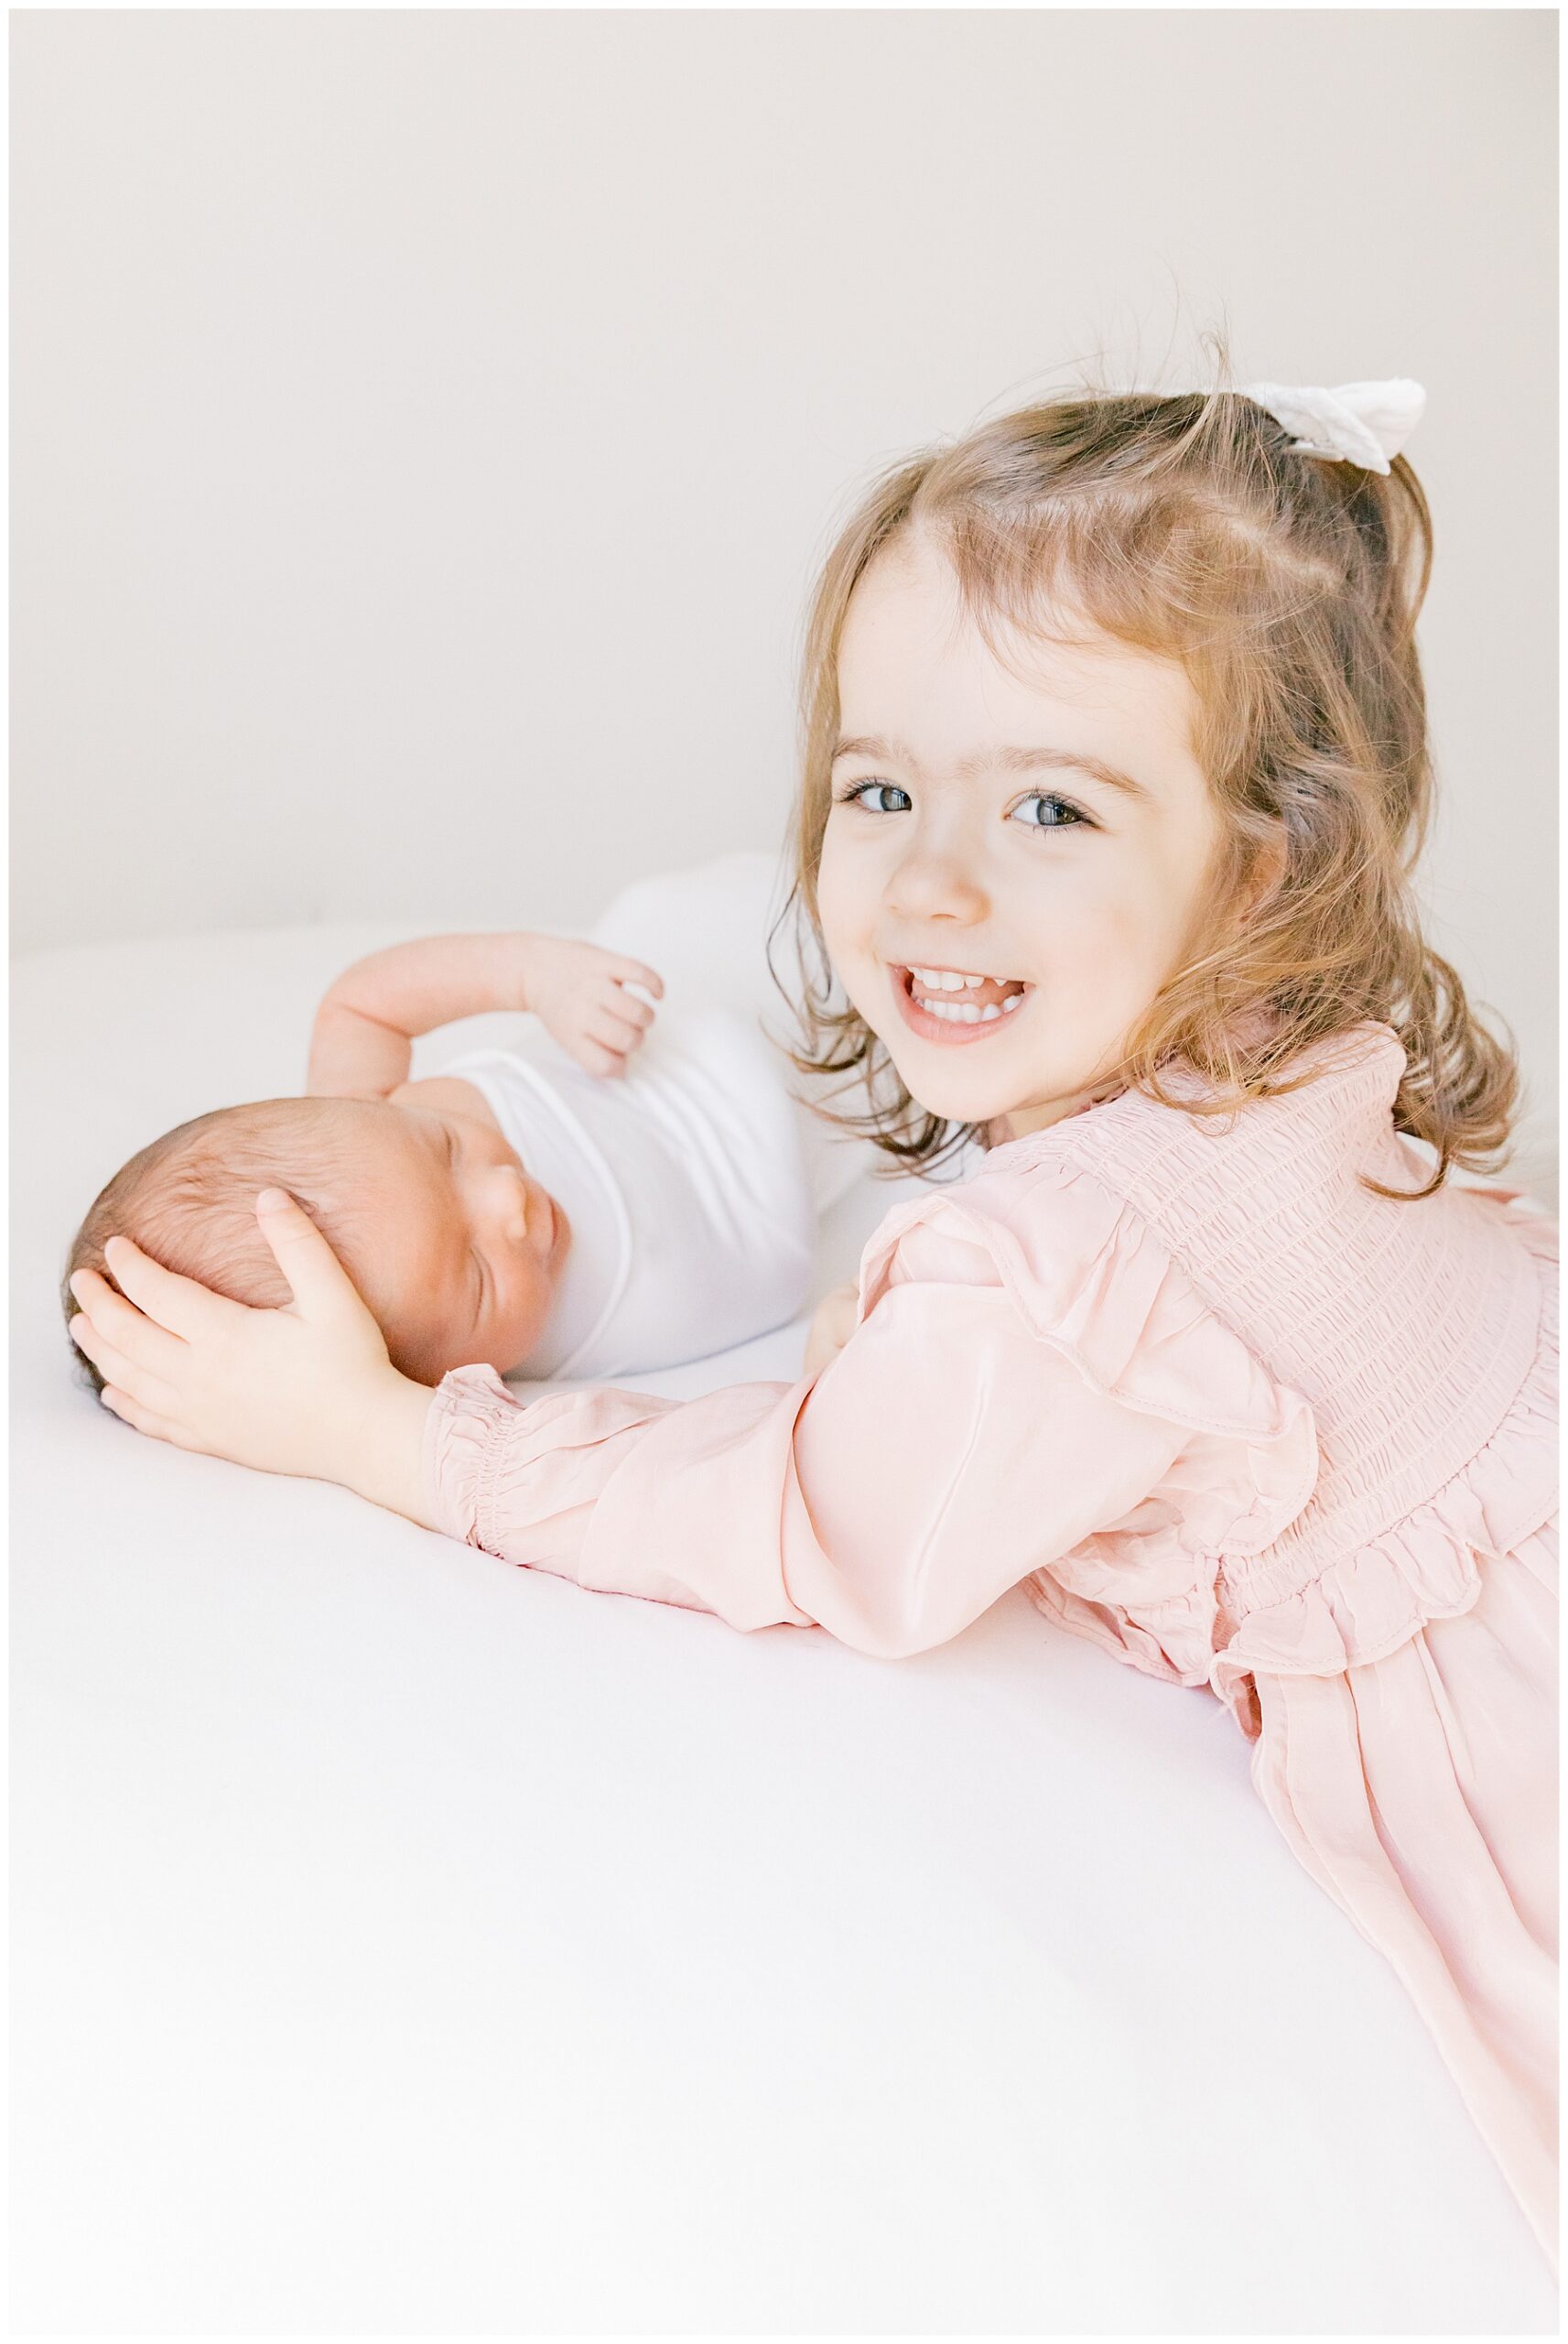 Big sister smiling with baby brother | Katie Petrick Phtography